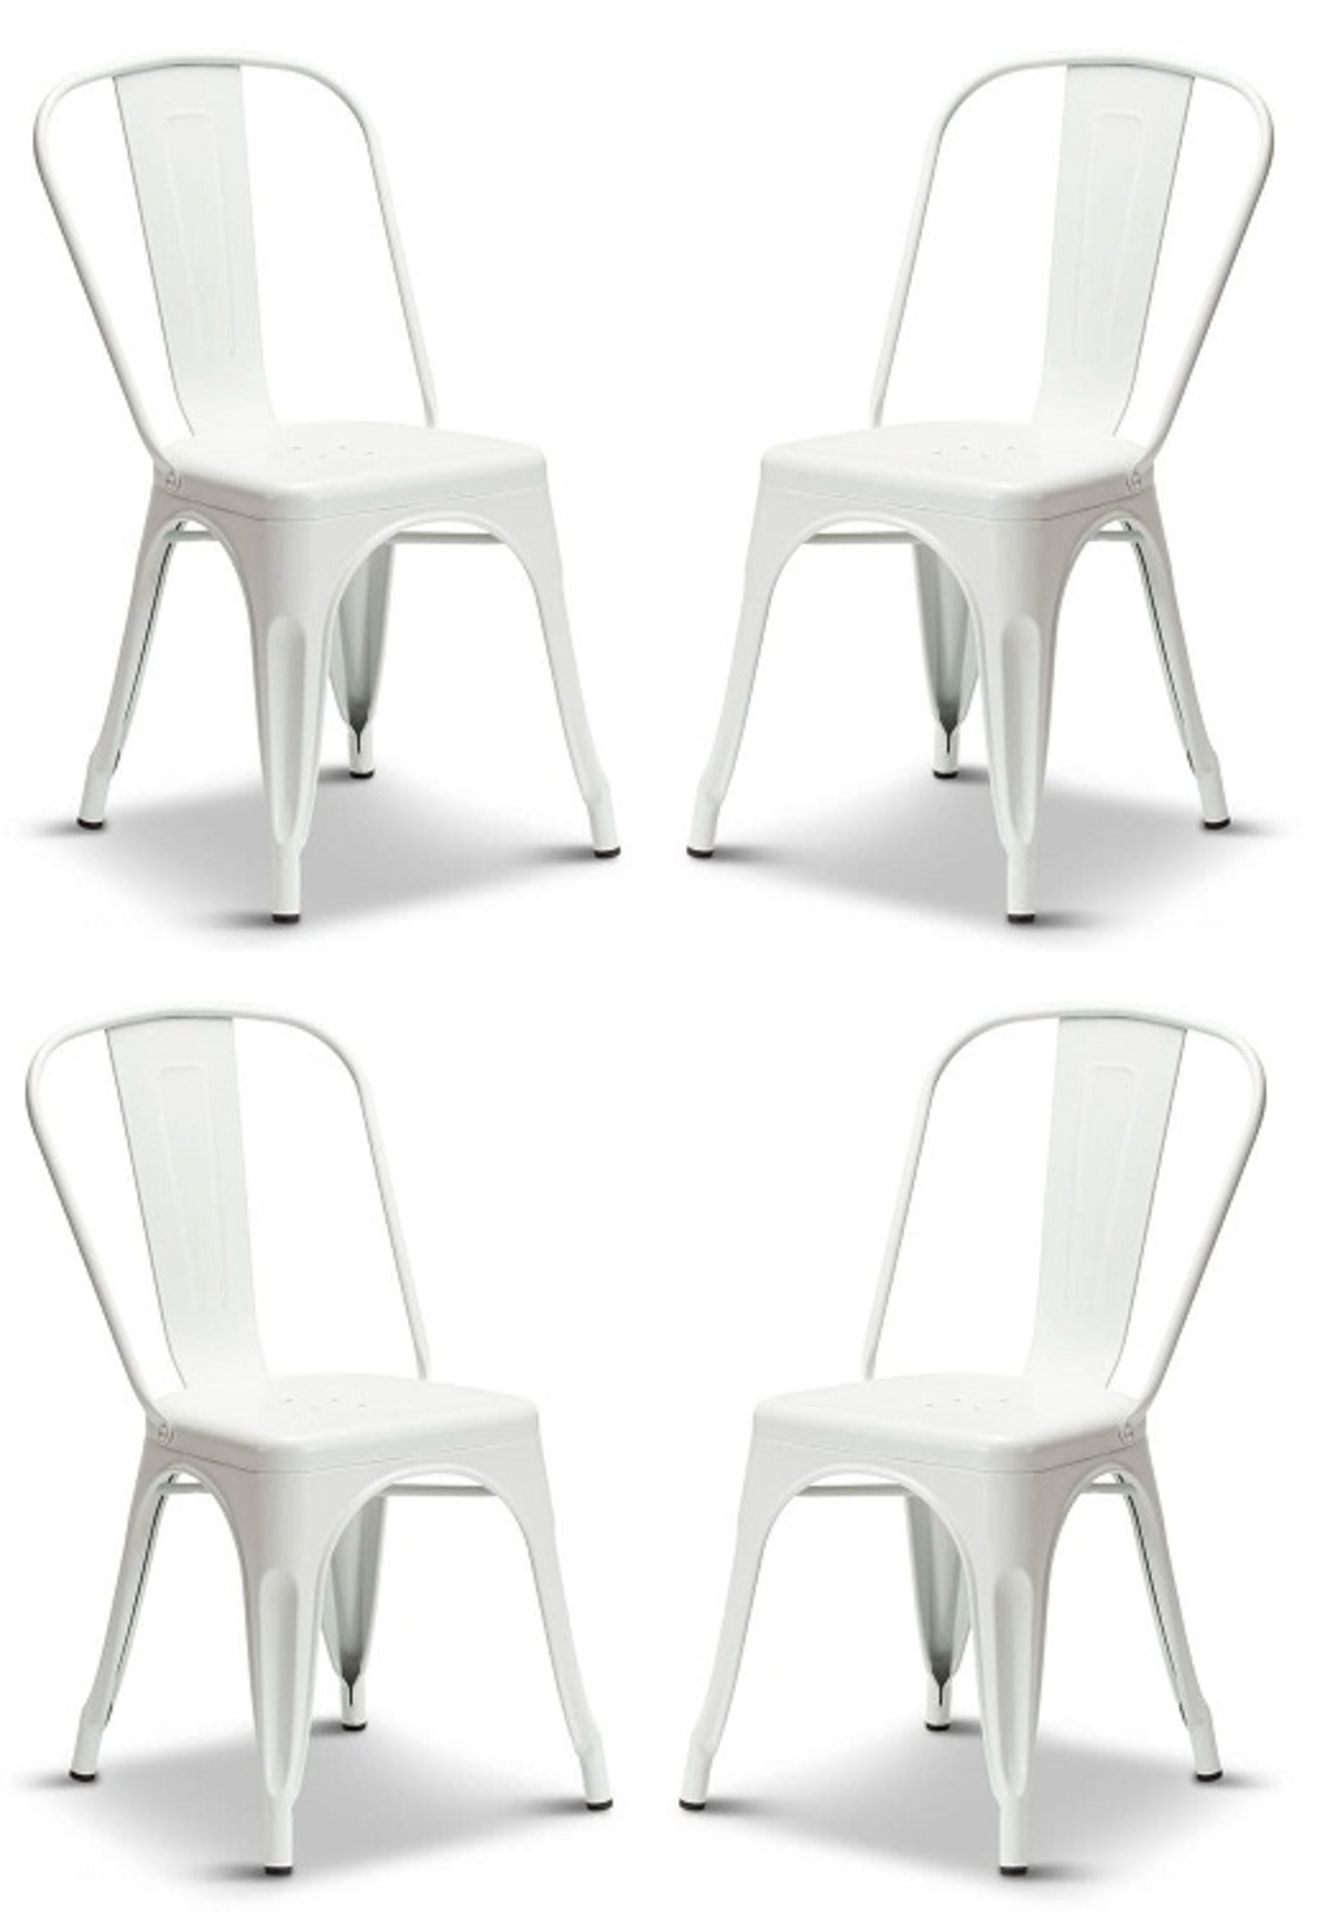 1 x Tolix Industrial Style Outdoor Bistro Table and Chair Set in White- Includes 1 x Table and 4 x - Image 5 of 14